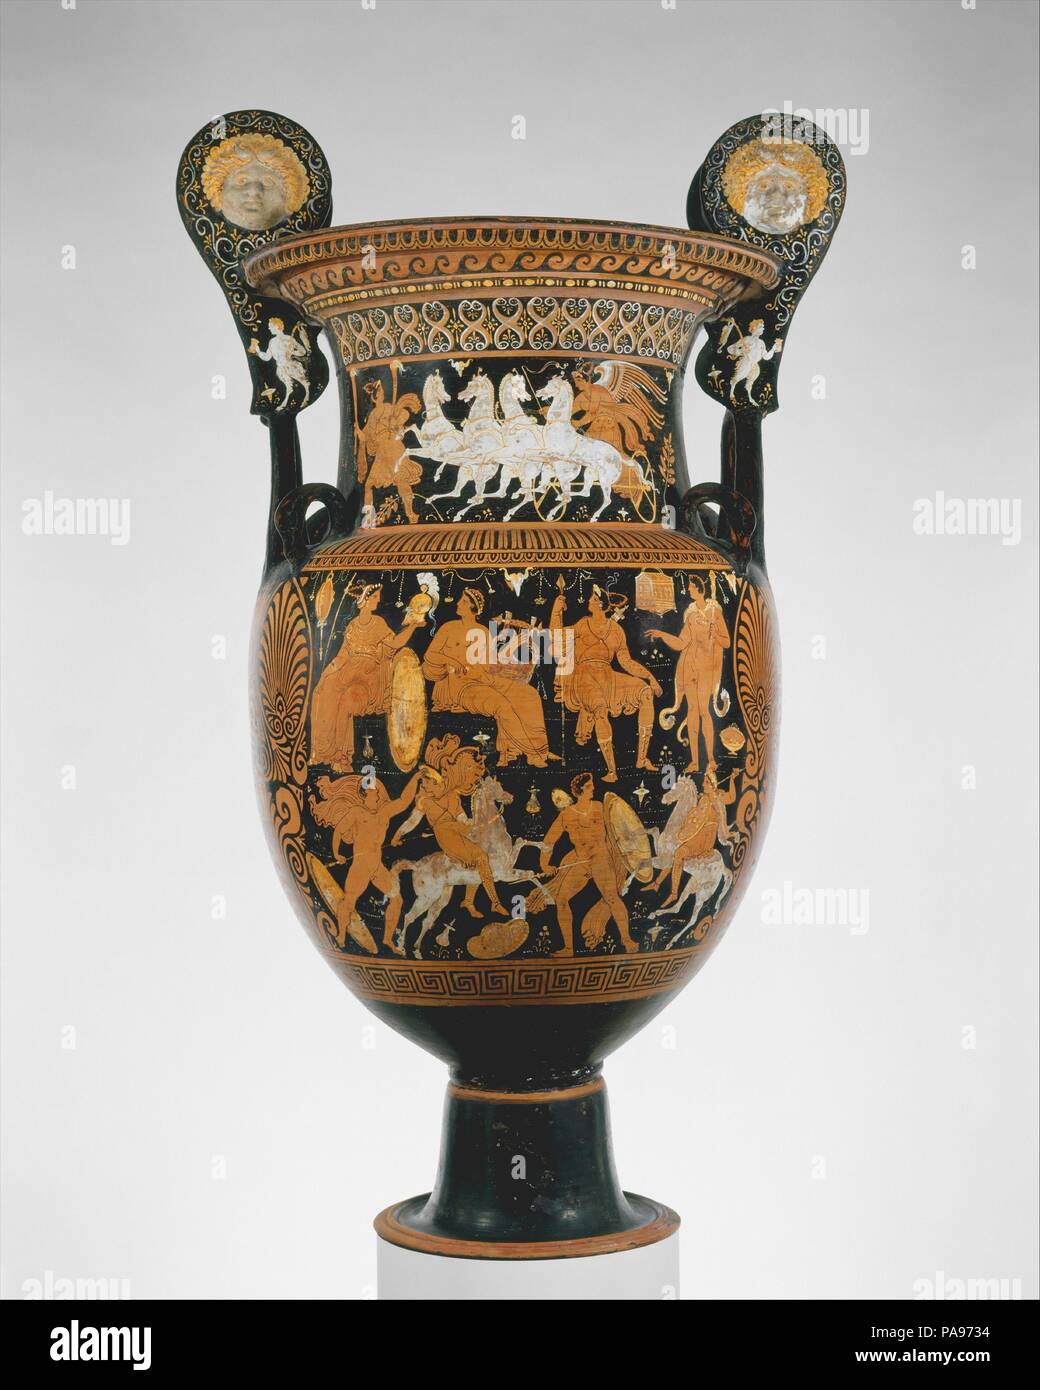 Terracotta volute-krater (vase for mixing wine and water). Culture: Greek, South Italian, Apulian. Dimensions: H. without handles: 36 1/16 in. (91.59 cm). Date: ca. 320-310 B.C..  On the body, obverse, assembly of gods above Amazonomachy  Reverse, youth in naiskos (shrine) between youths and women  On the neck, obverse, woman with torches leading Nike in chariot  On the handles, heads of Io and young Pans  The Capodimonte Painter was a follower of the Baltimore Painter, one of the most prolific late Apulian artists. Although they produced vases of diverse shapes and  sizes, these artists are a Stock Photo